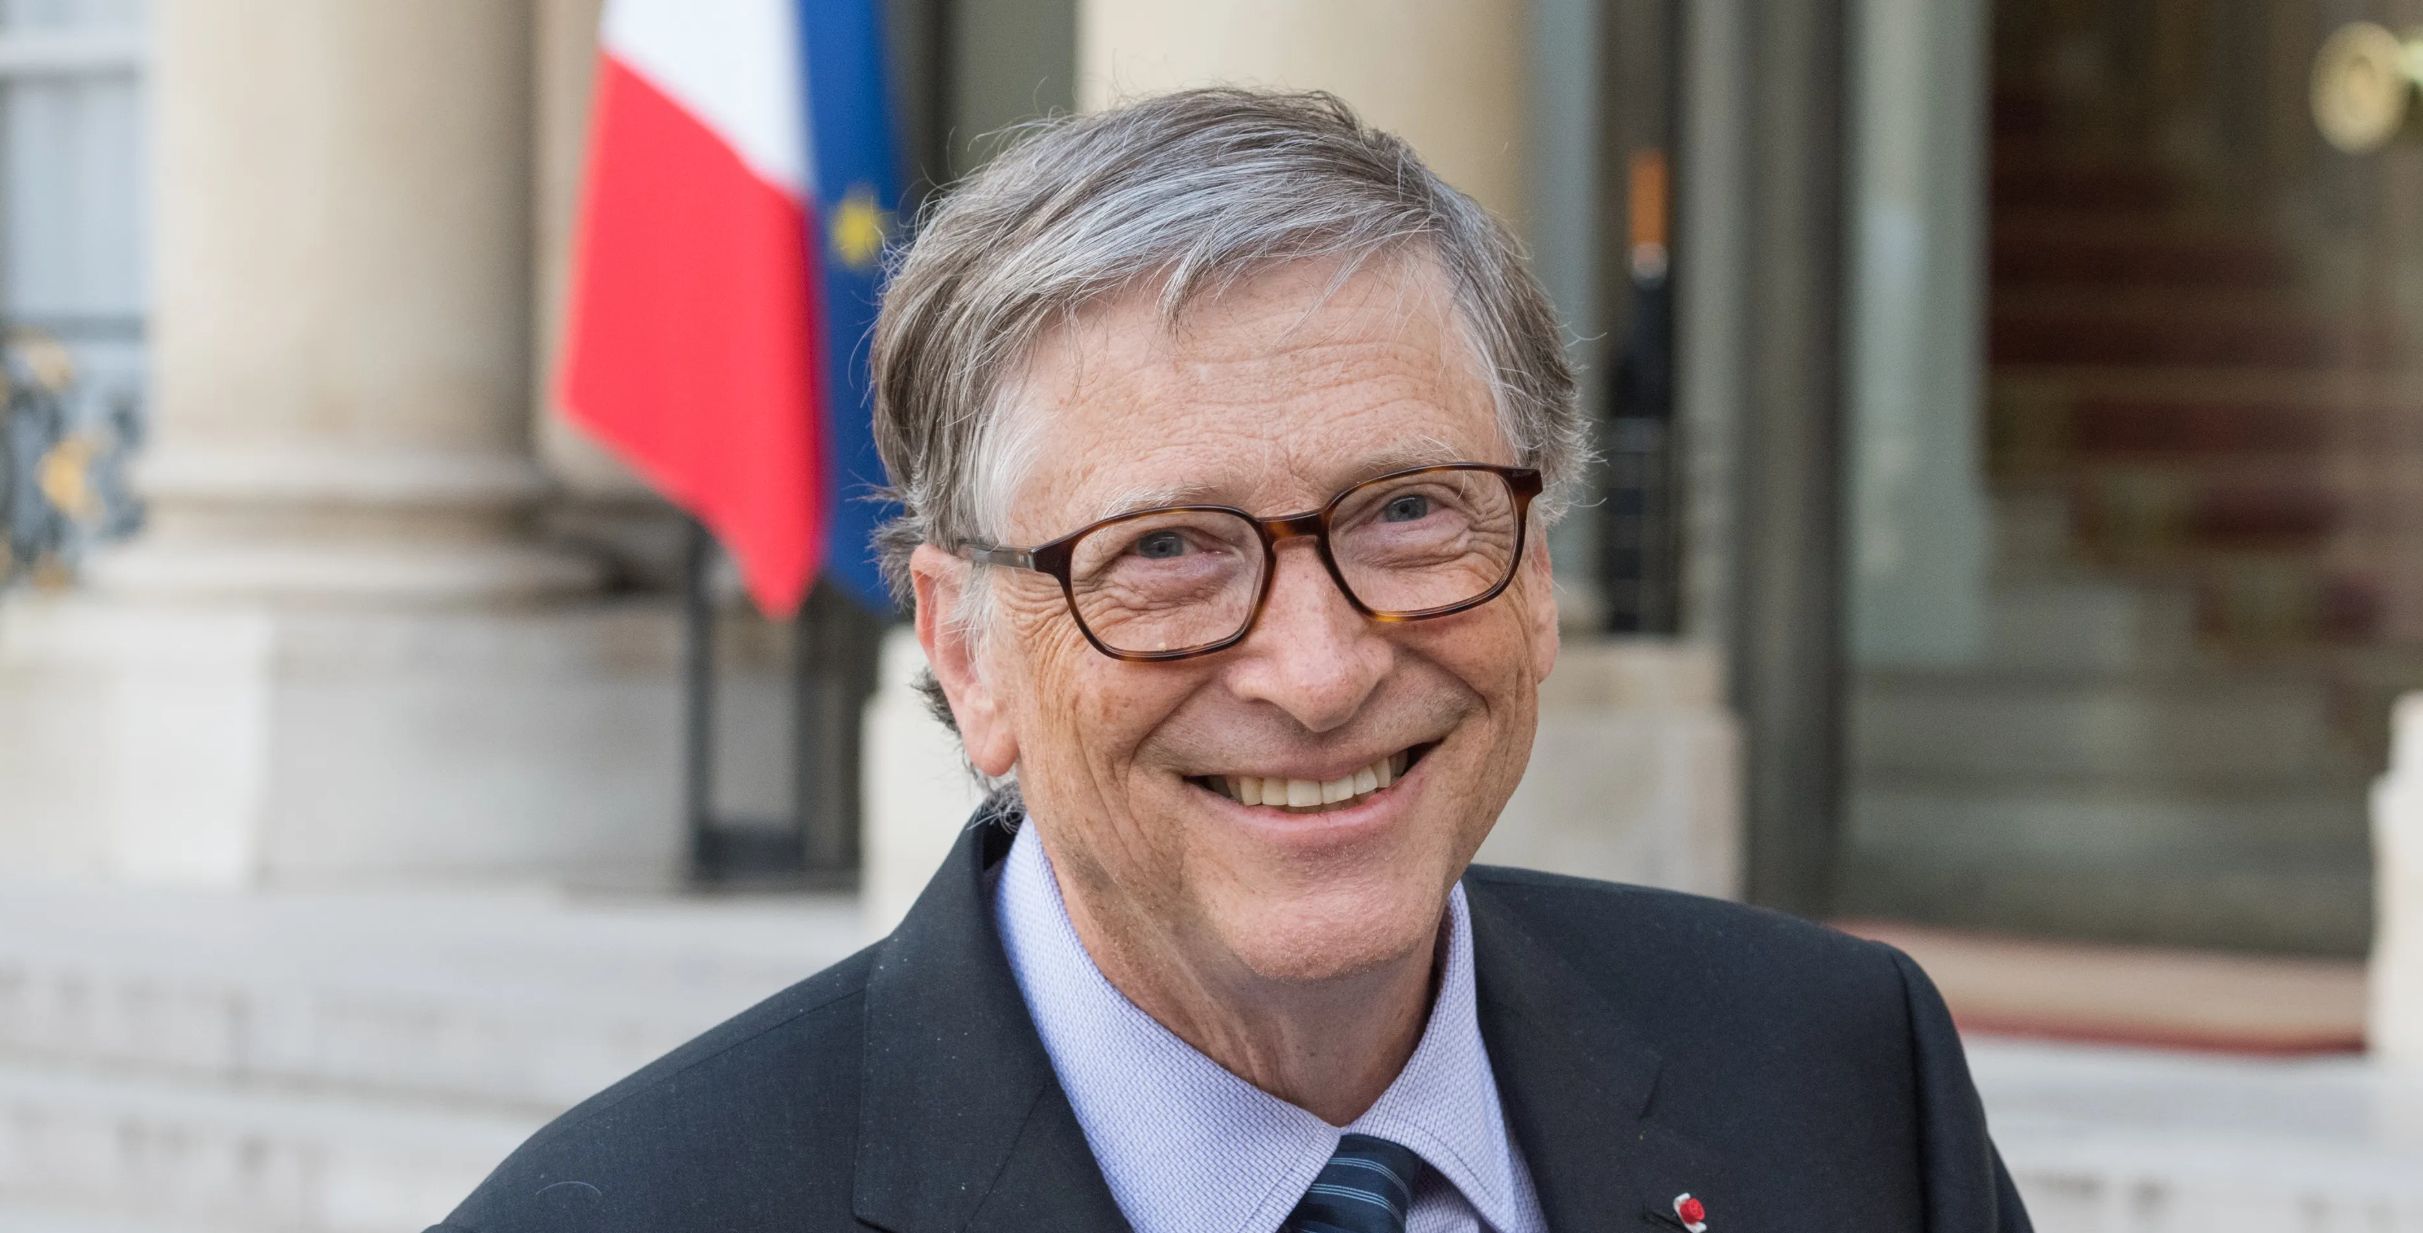 Microsoft co-founder Bill Gates poses for photographs.